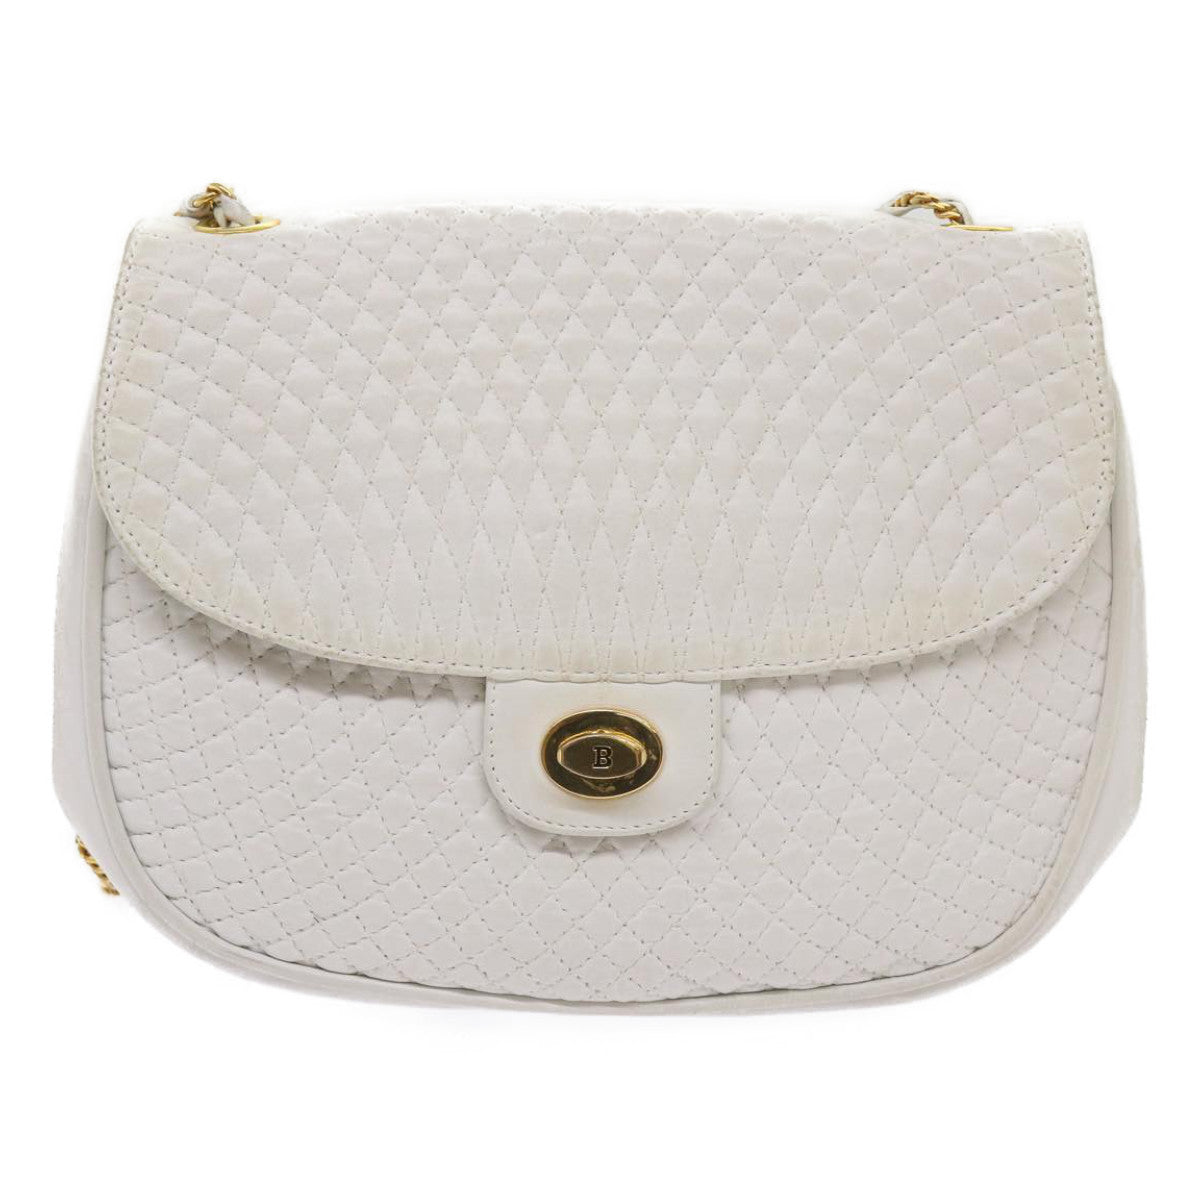 BALLY Quilted Shoulder Bag Leather White Auth bs11685 - 0